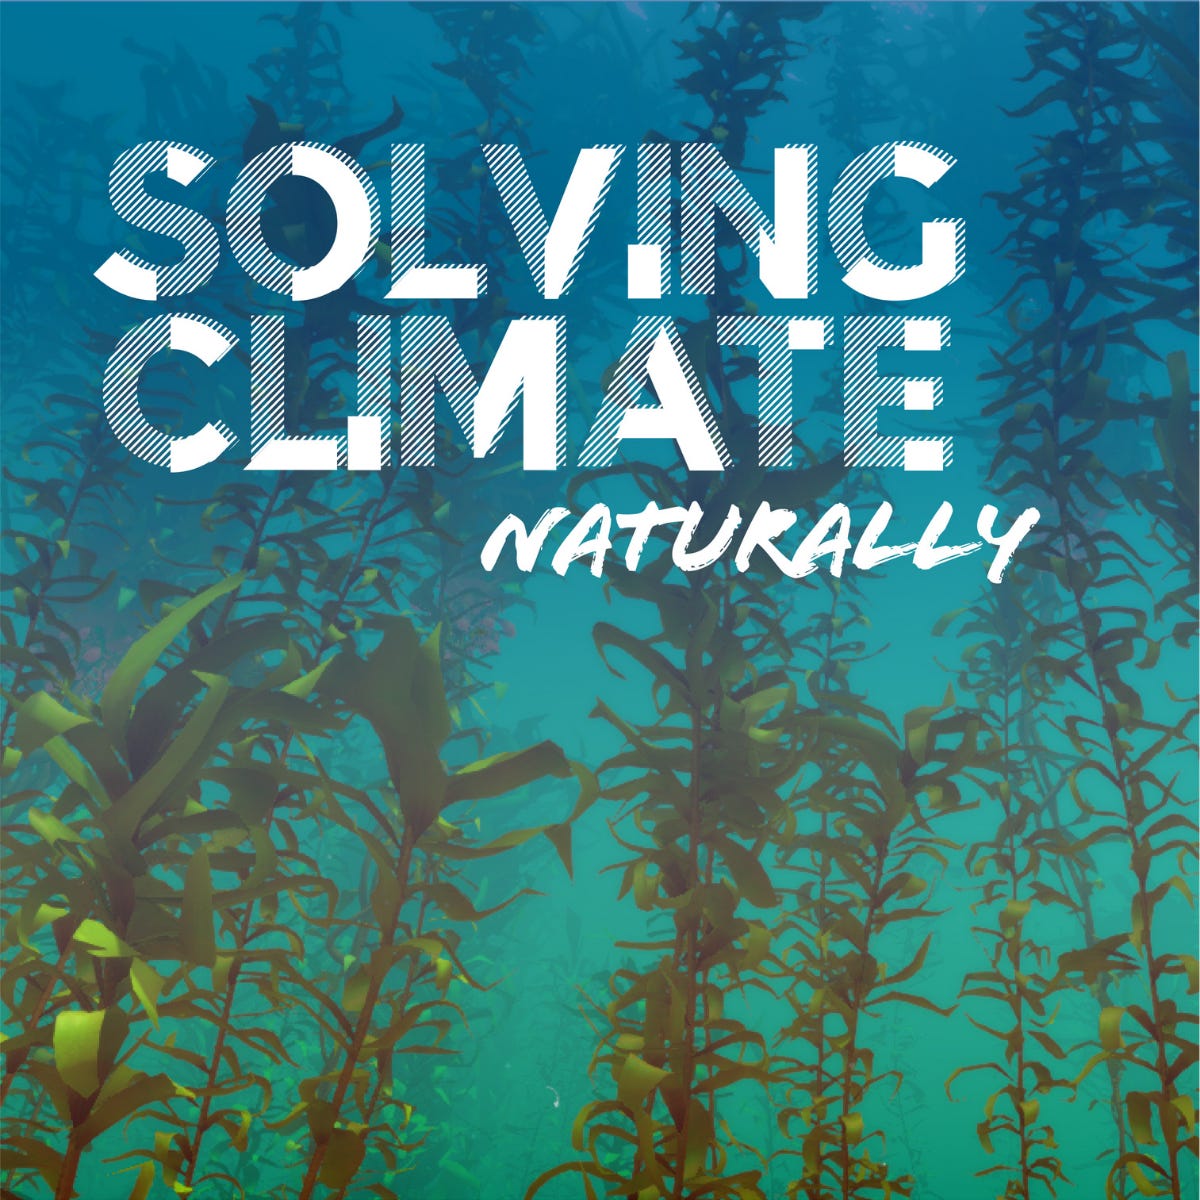 Solving Climate, Naturally